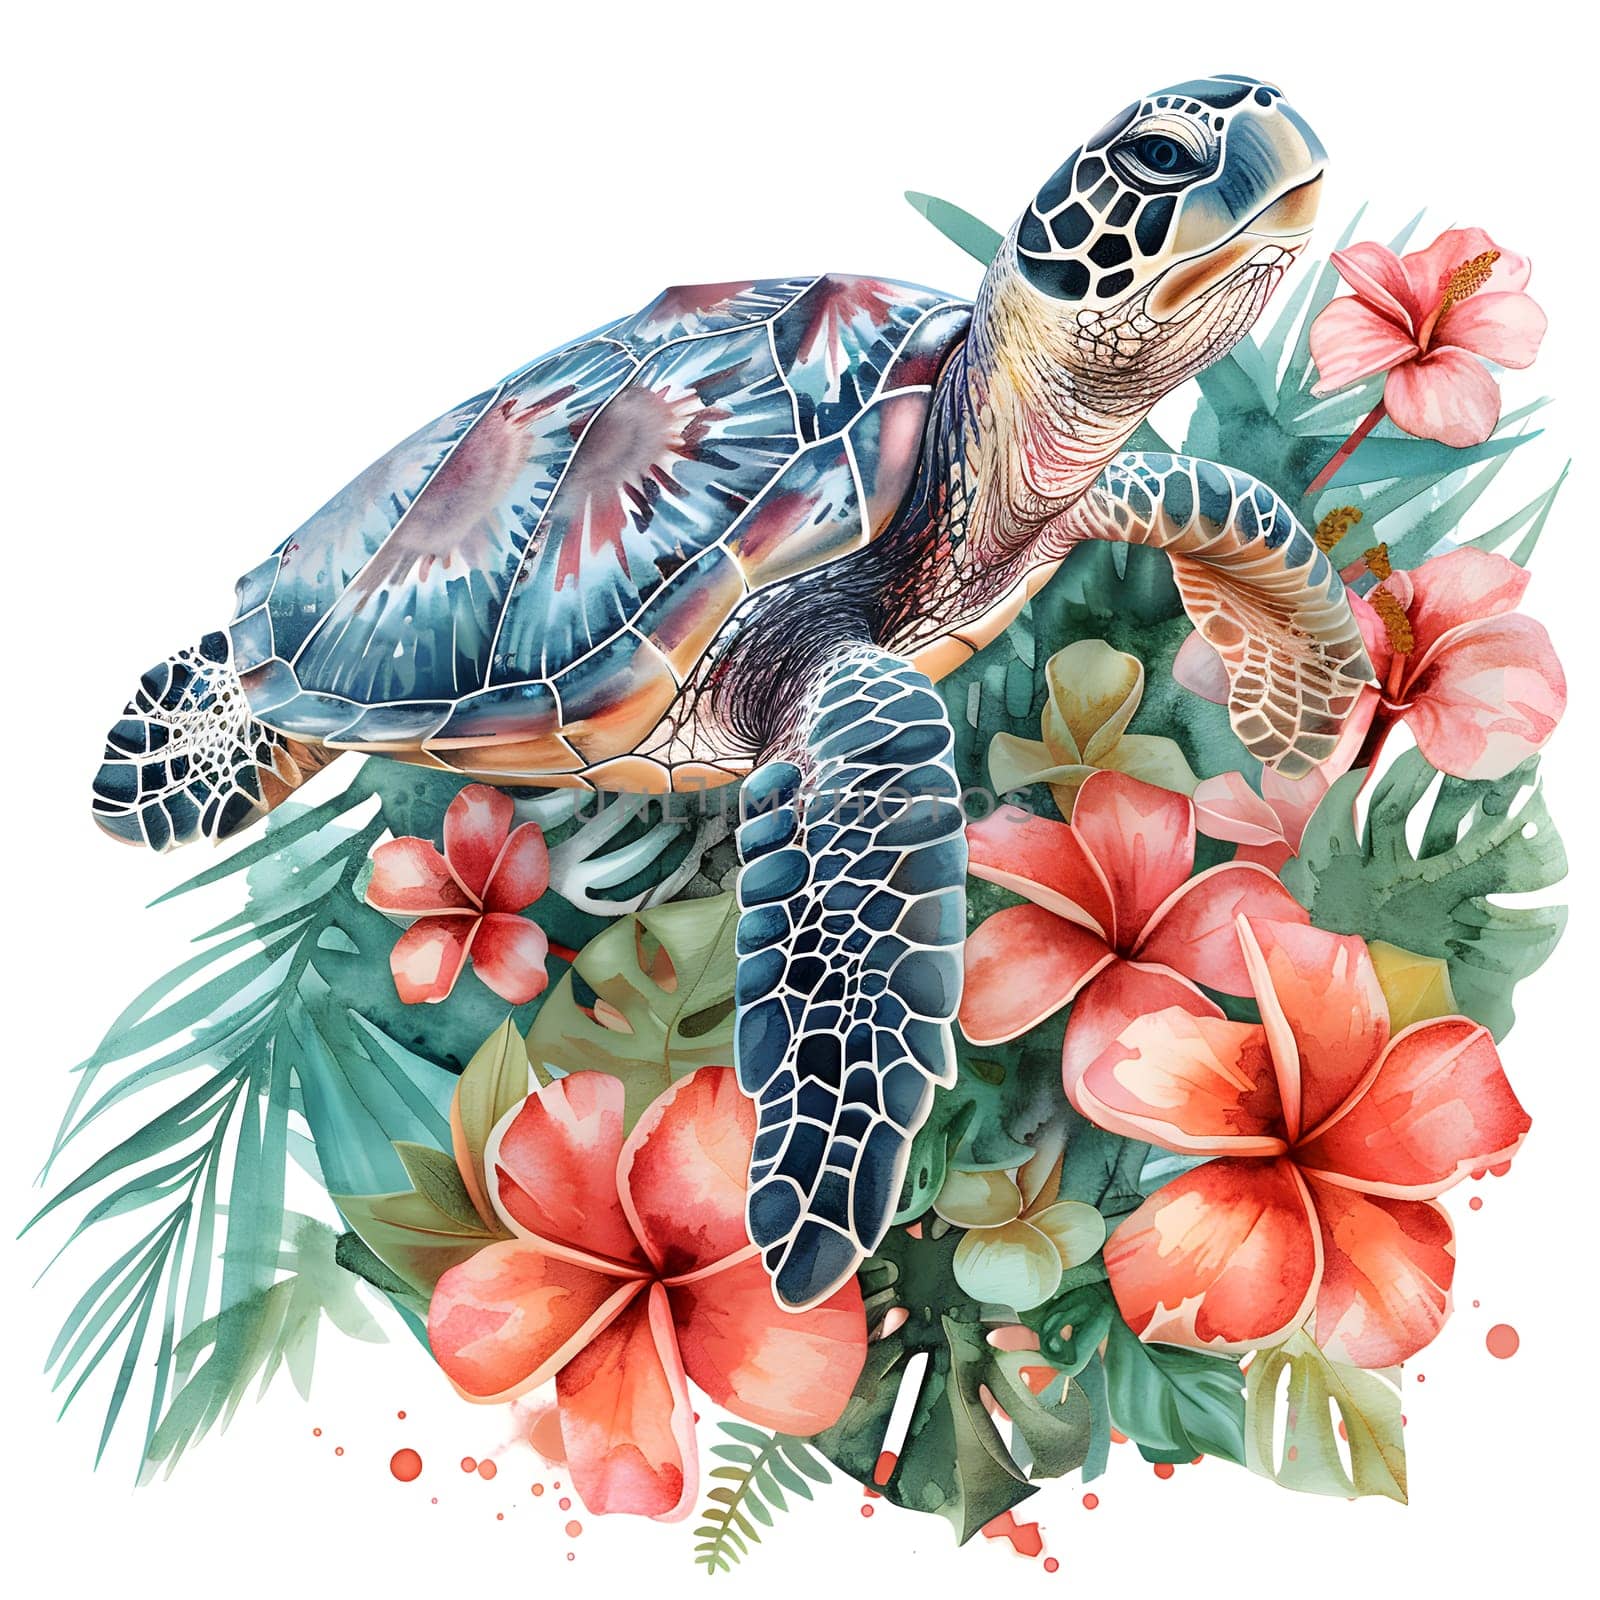 A sea turtle is depicted in a colorful painting surrounded by tropical flowers and leaves, creating a beautiful botanical and artistic illustration